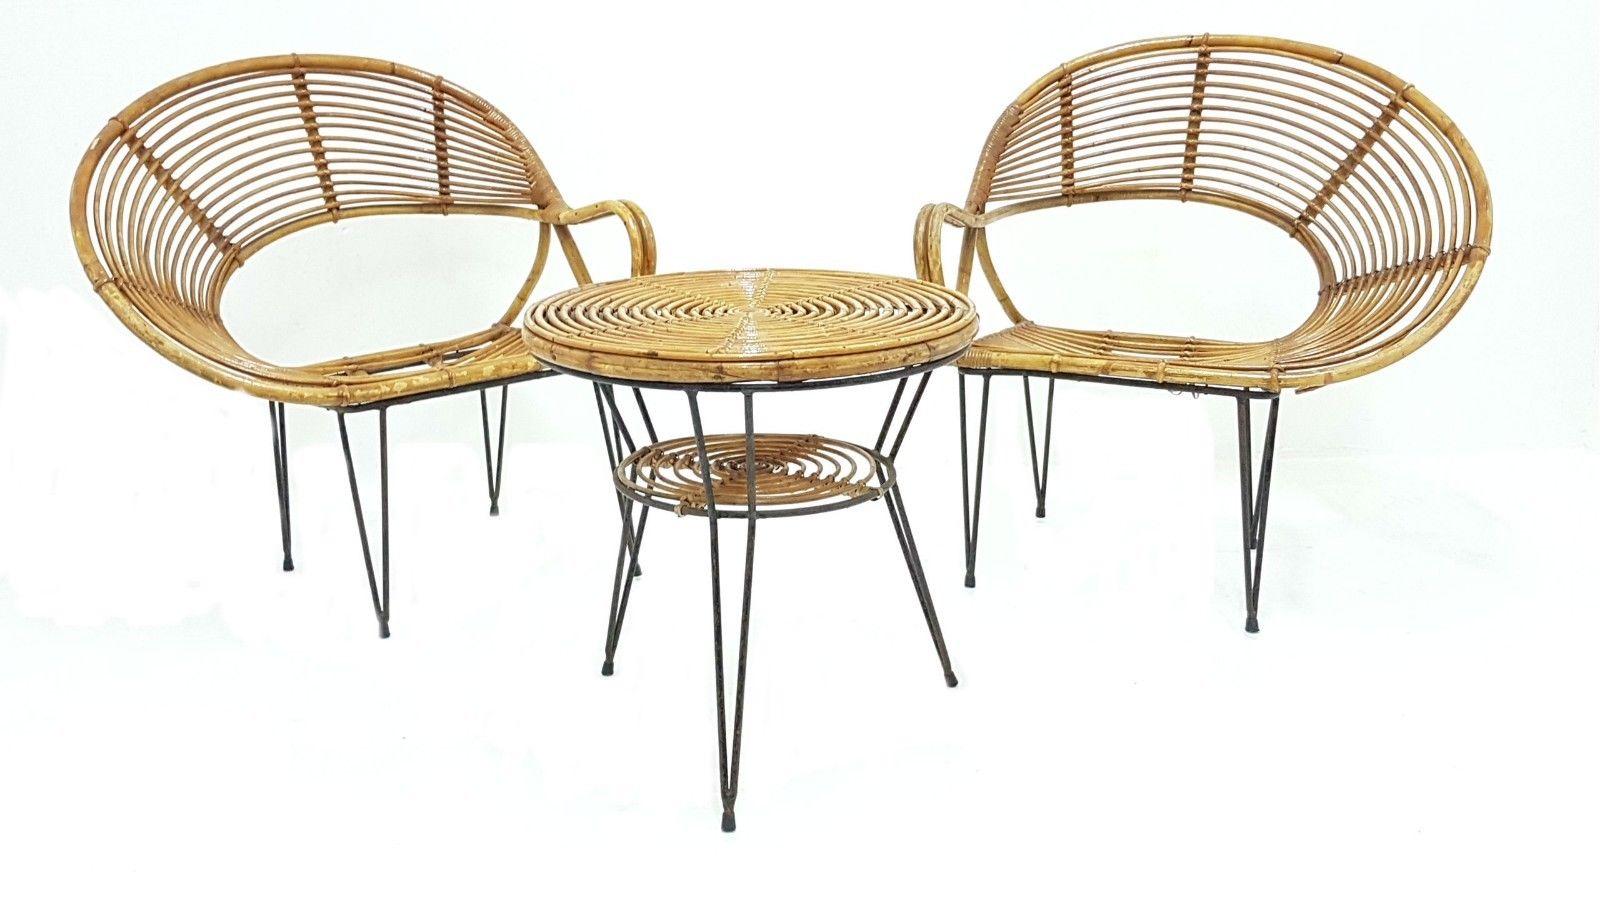 Lounge Chairs and Bamboo Table Design Janine Abraham & Dirk Jan Rol, 1950s In Good Condition For Sale In taranto, IT